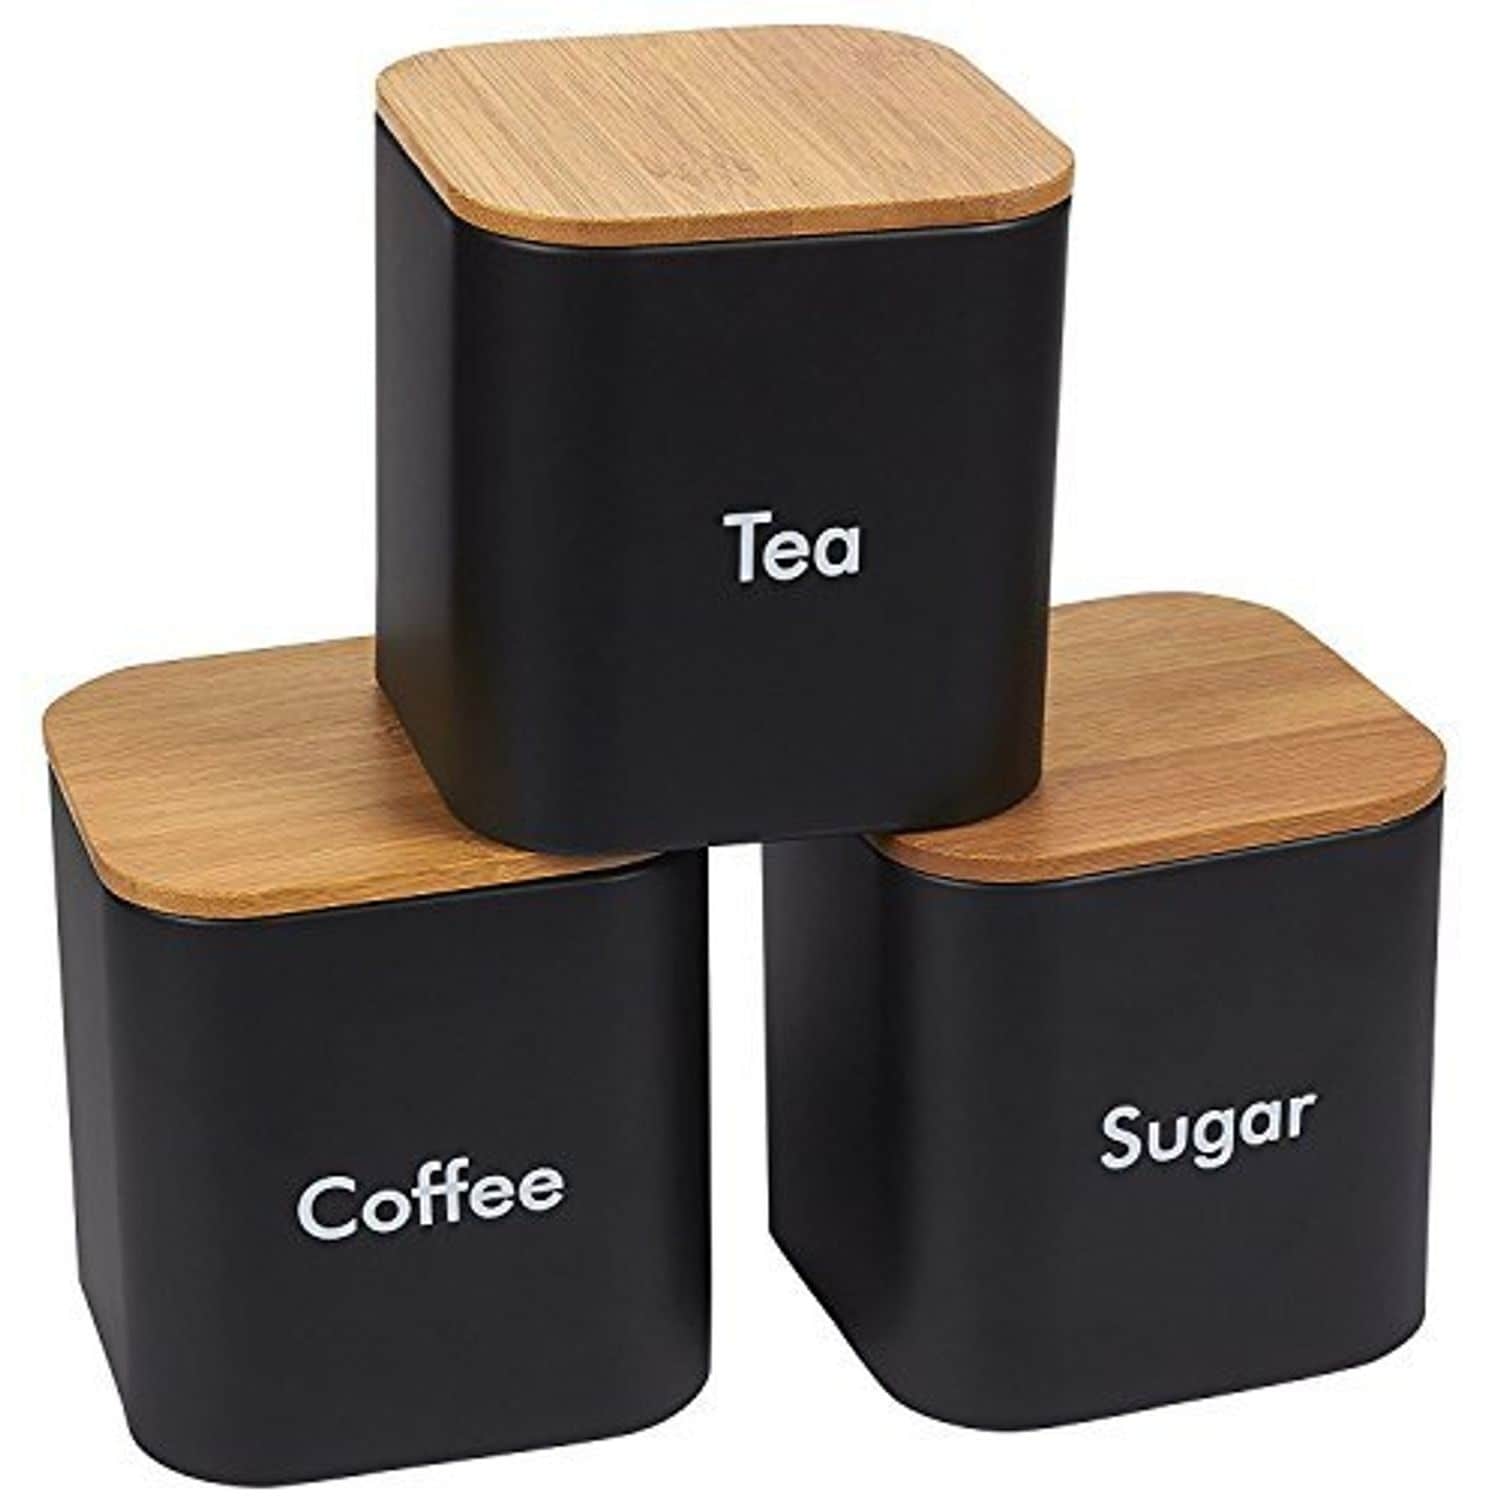 9 x 10.5 cm/3.5 x 4.1 inches Ceramic Tea Storage Container Kitchen Storage Canister Jar for Candy Coffee 13 